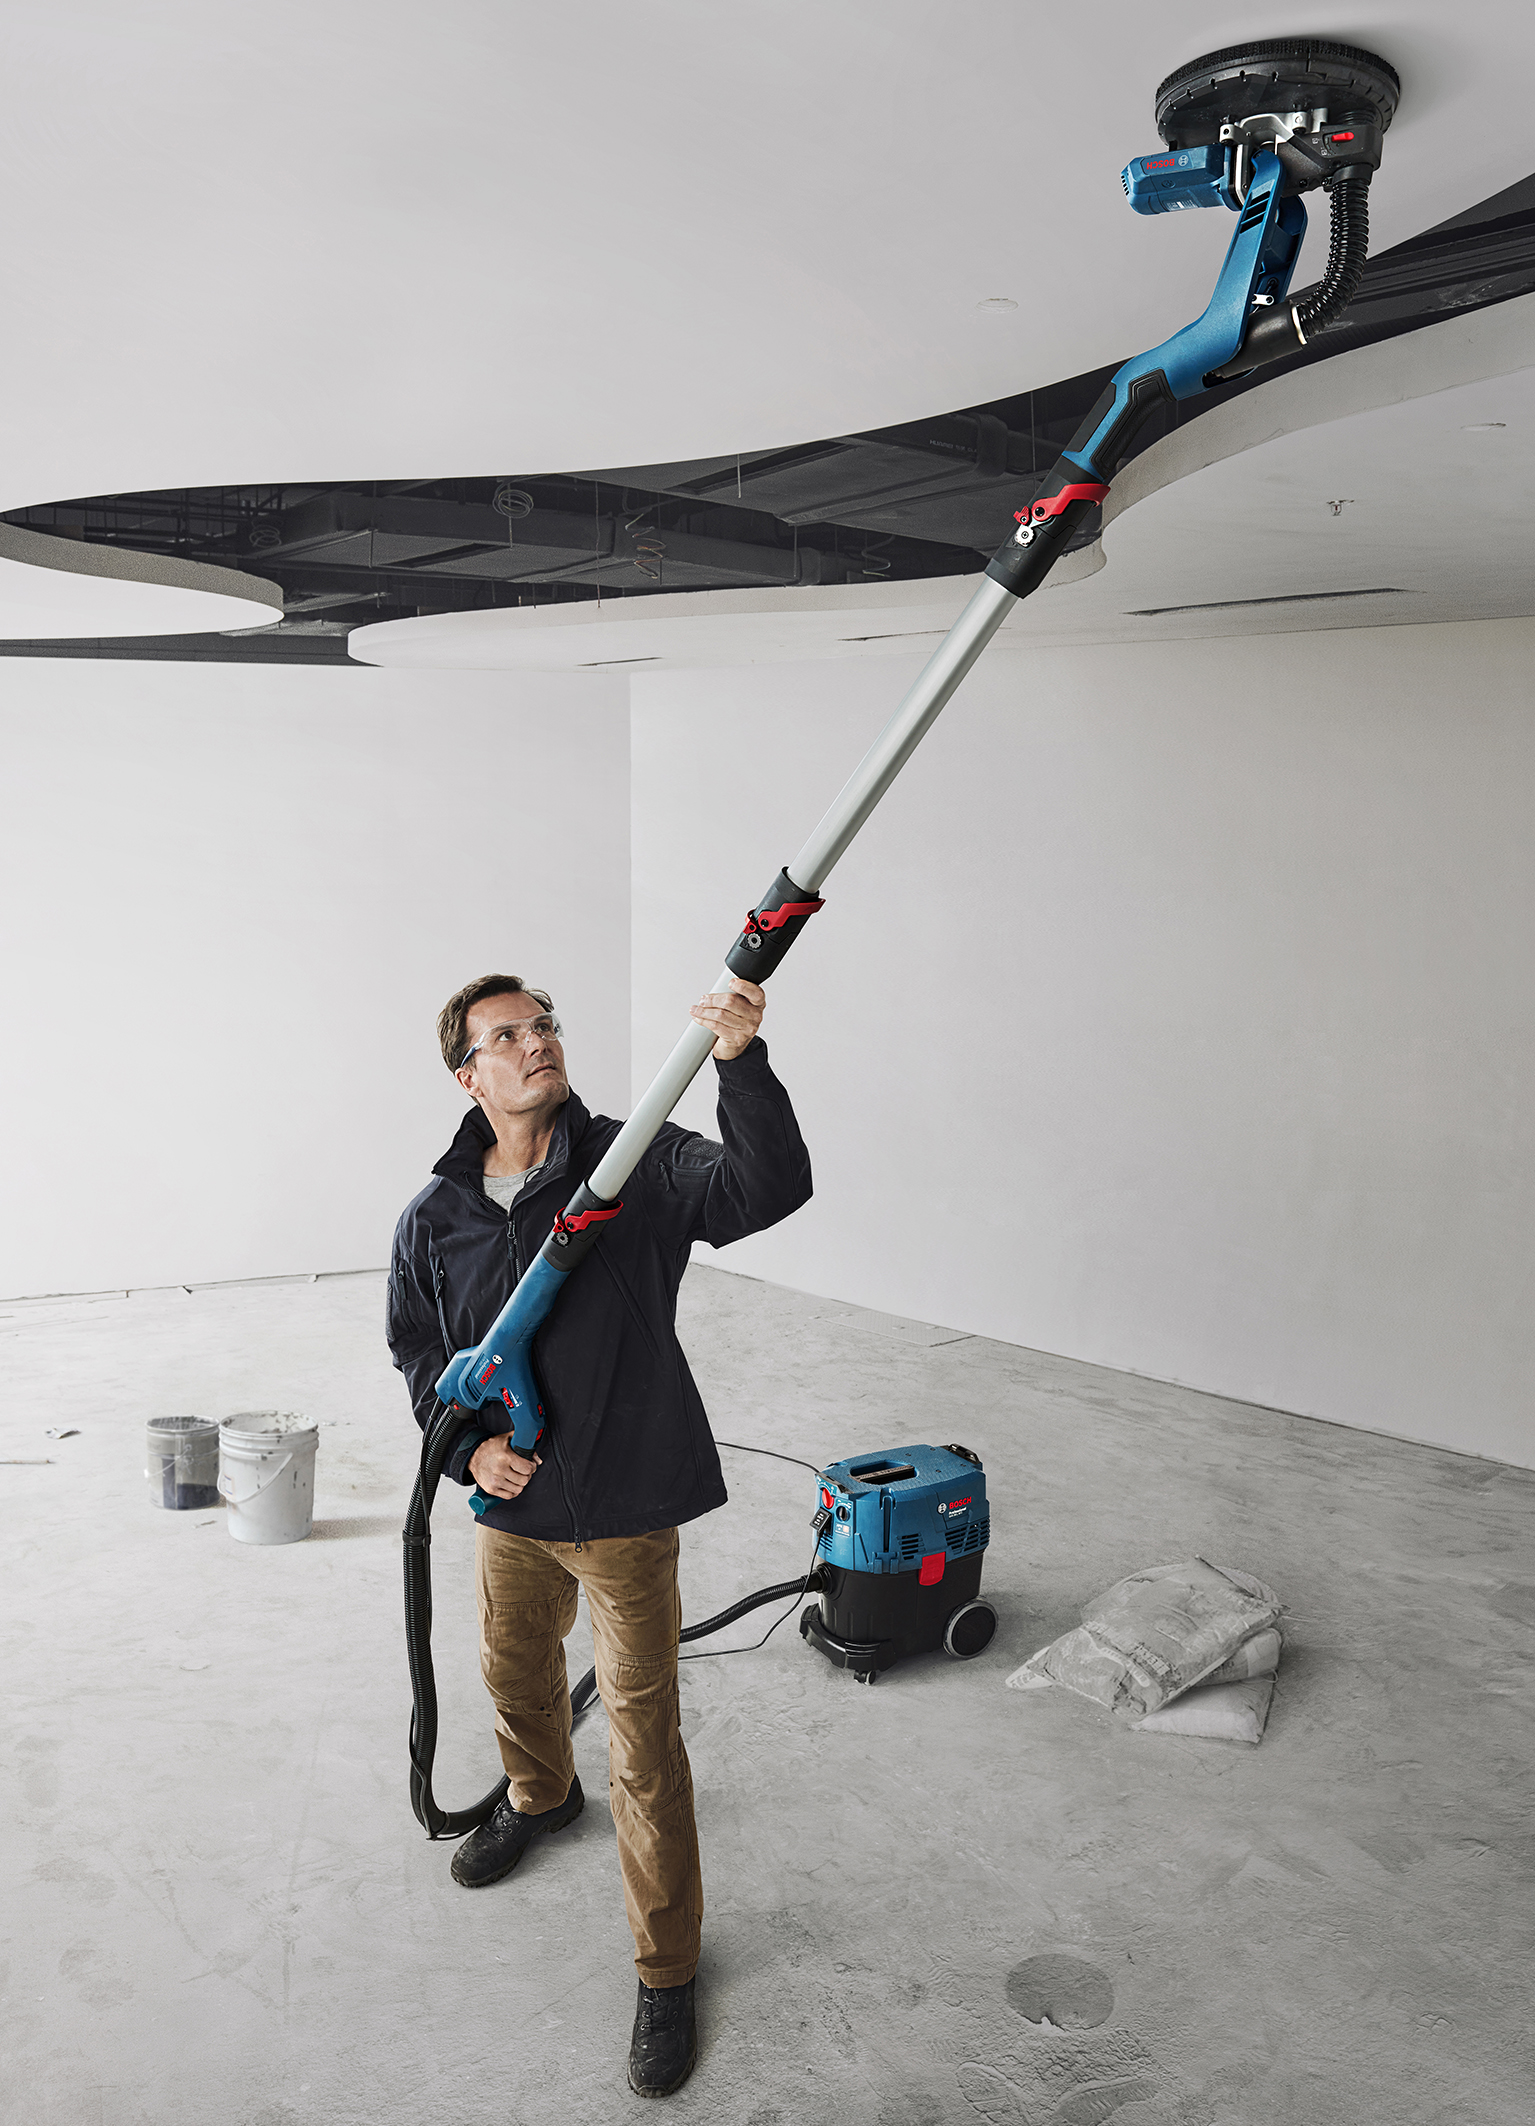 Effortless sanding with a high reach: GTR 55-225 Professional drywall sander from Bosch for professionals